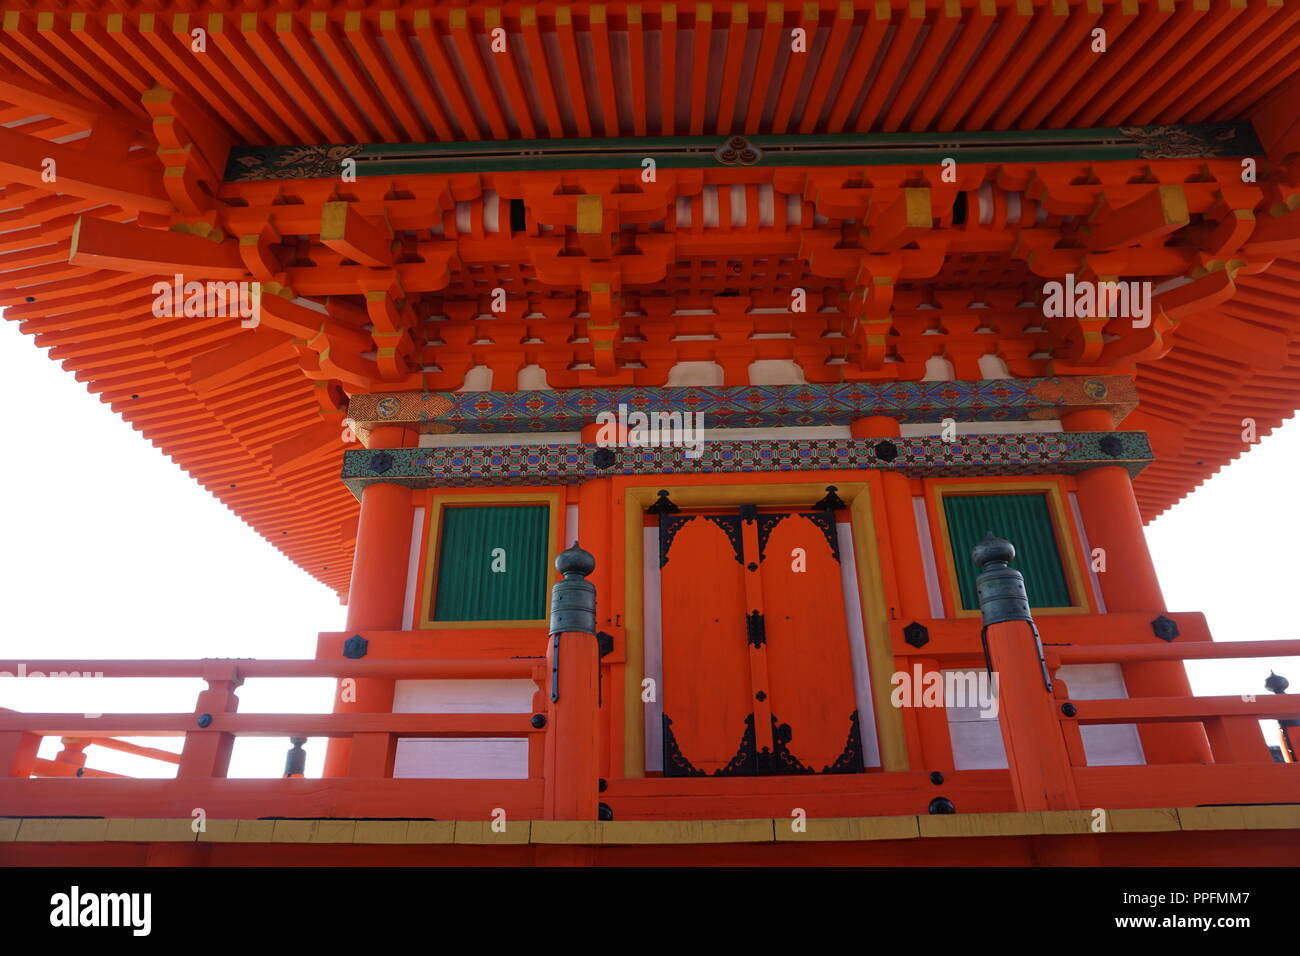 Kyoto, Japan - August 01, 2018: the first story of  three storied pagoda of the Kiyomizu-dera Buddhist Temple, a UNESCO World Cultural Heritage site.  Stock Photo